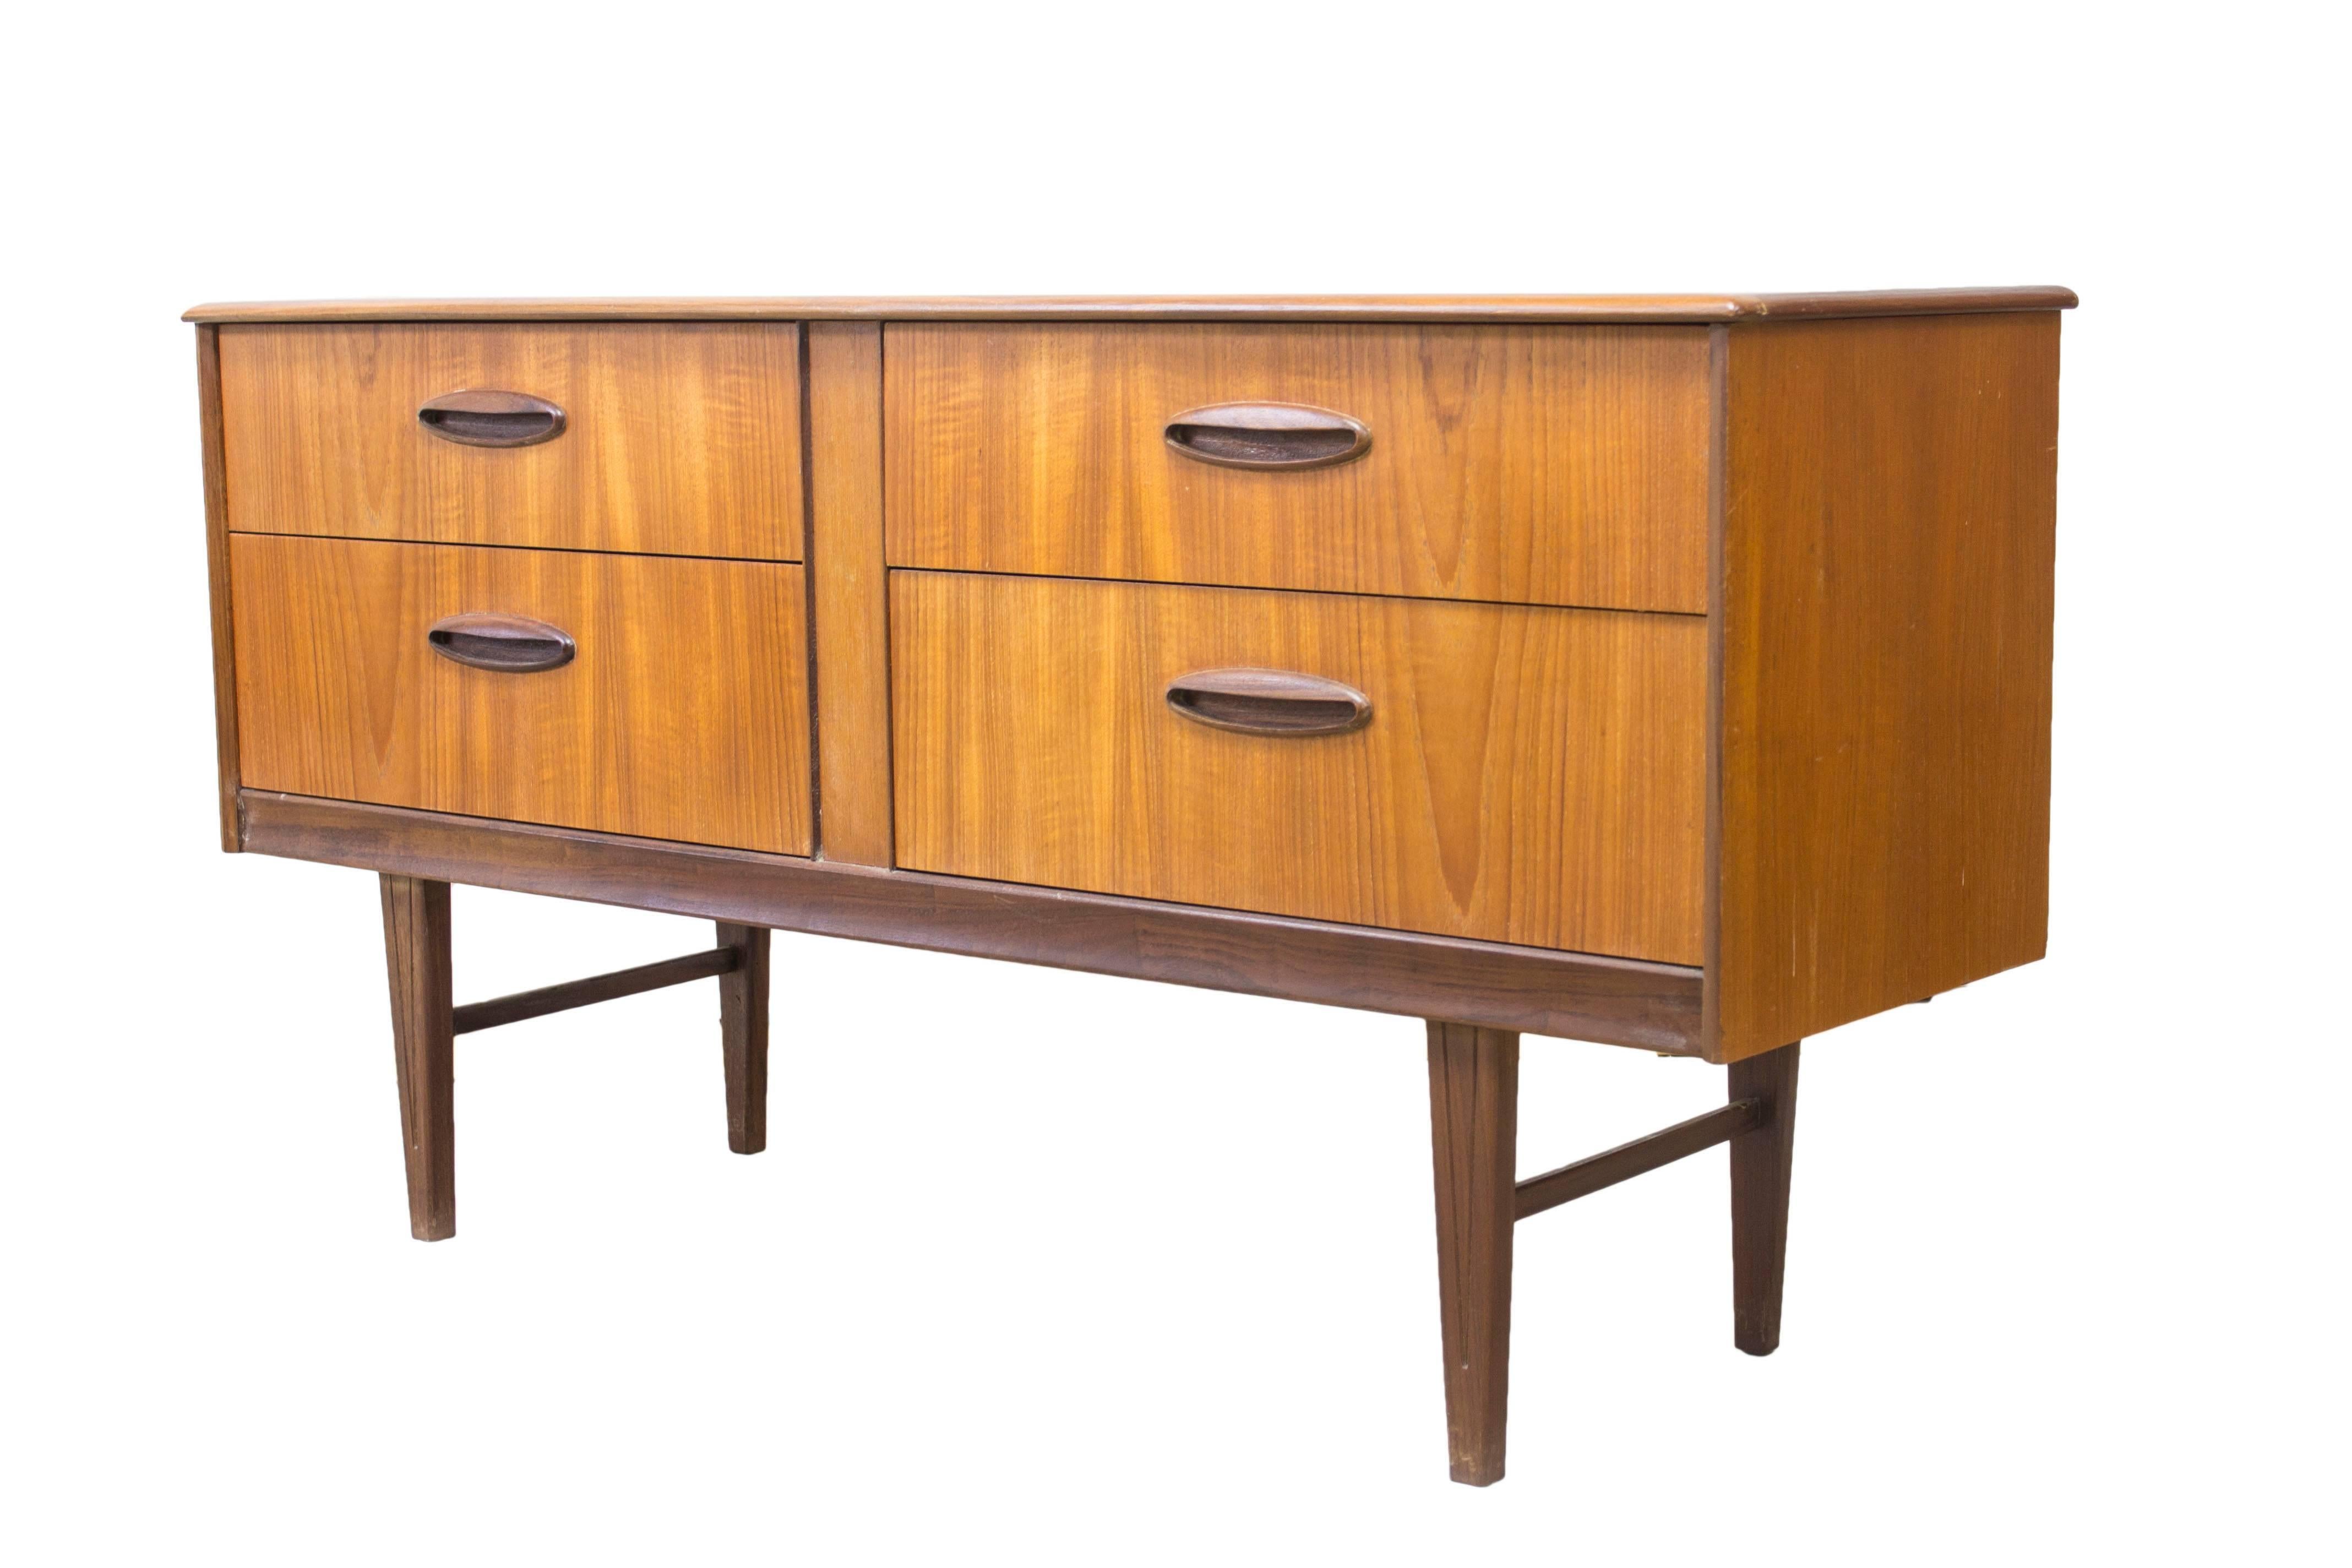 The Danish designers of the Mid-Century movement brought clean, simple lines to the masses and introduced the world to the wonders of teak in it’s many guises, stunning grain and rich colors.

This beautifully compact unit with it’s four ample